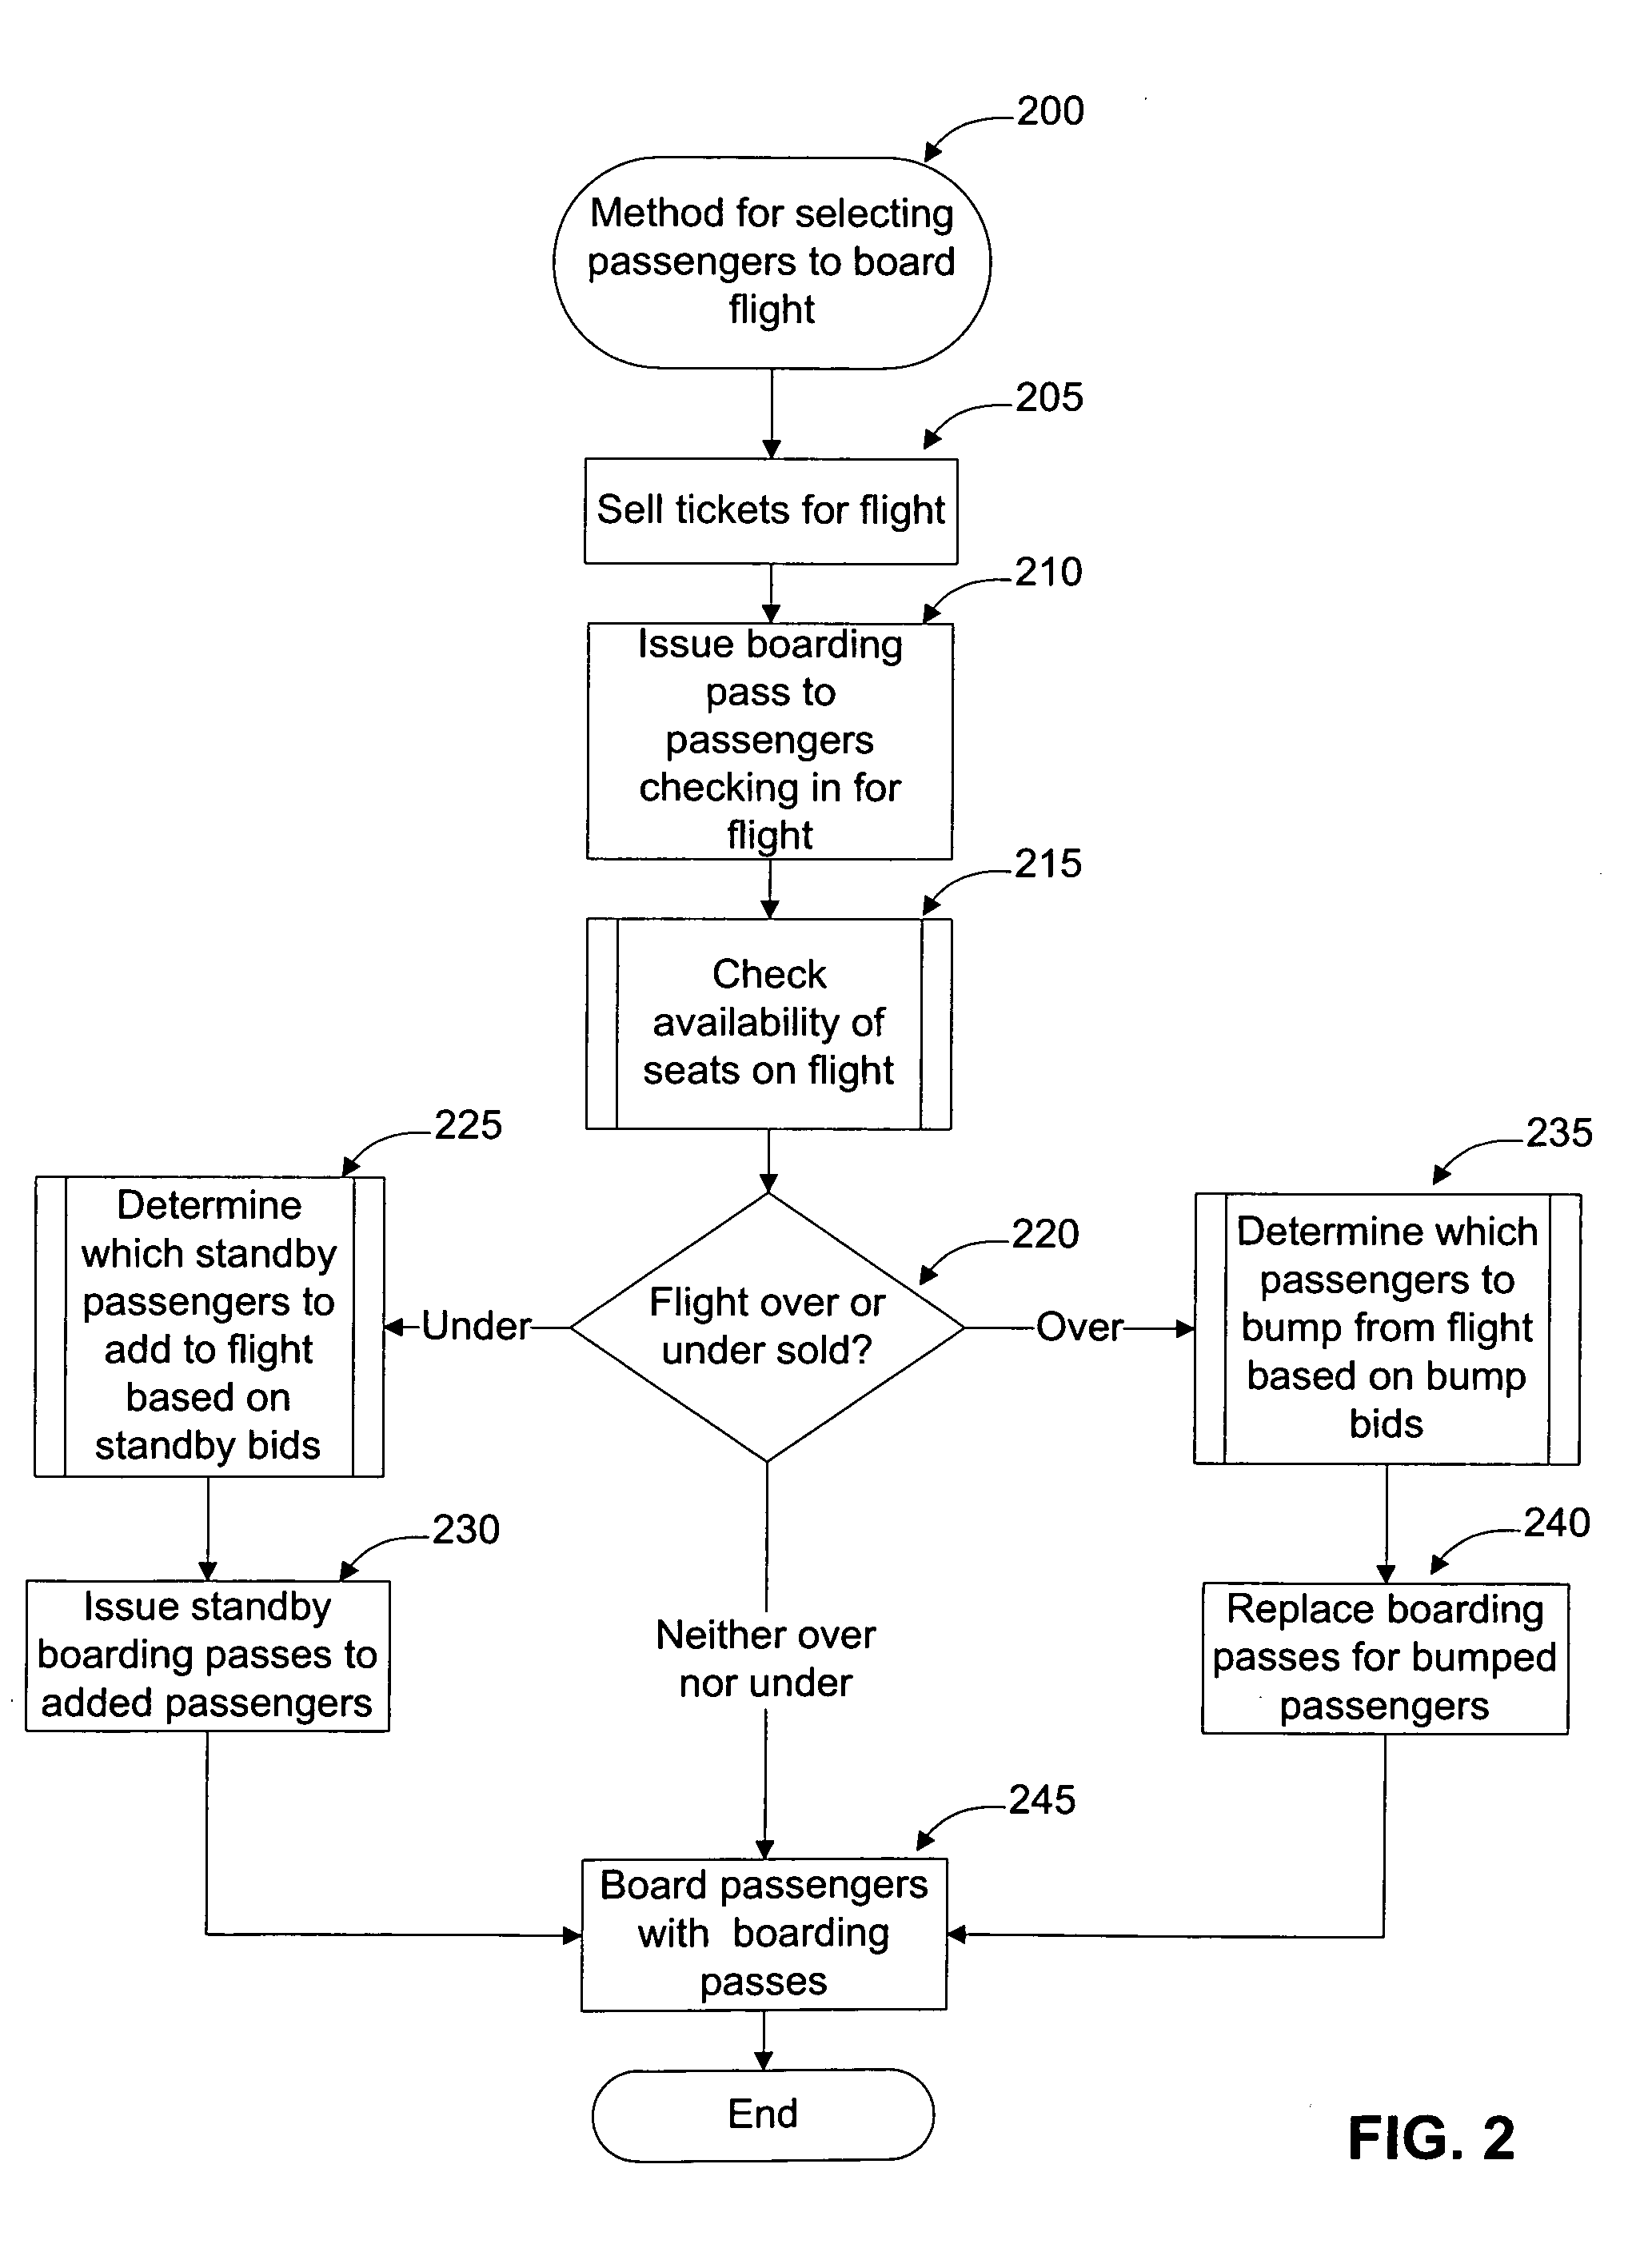 System and method for boarding passangers based on bids